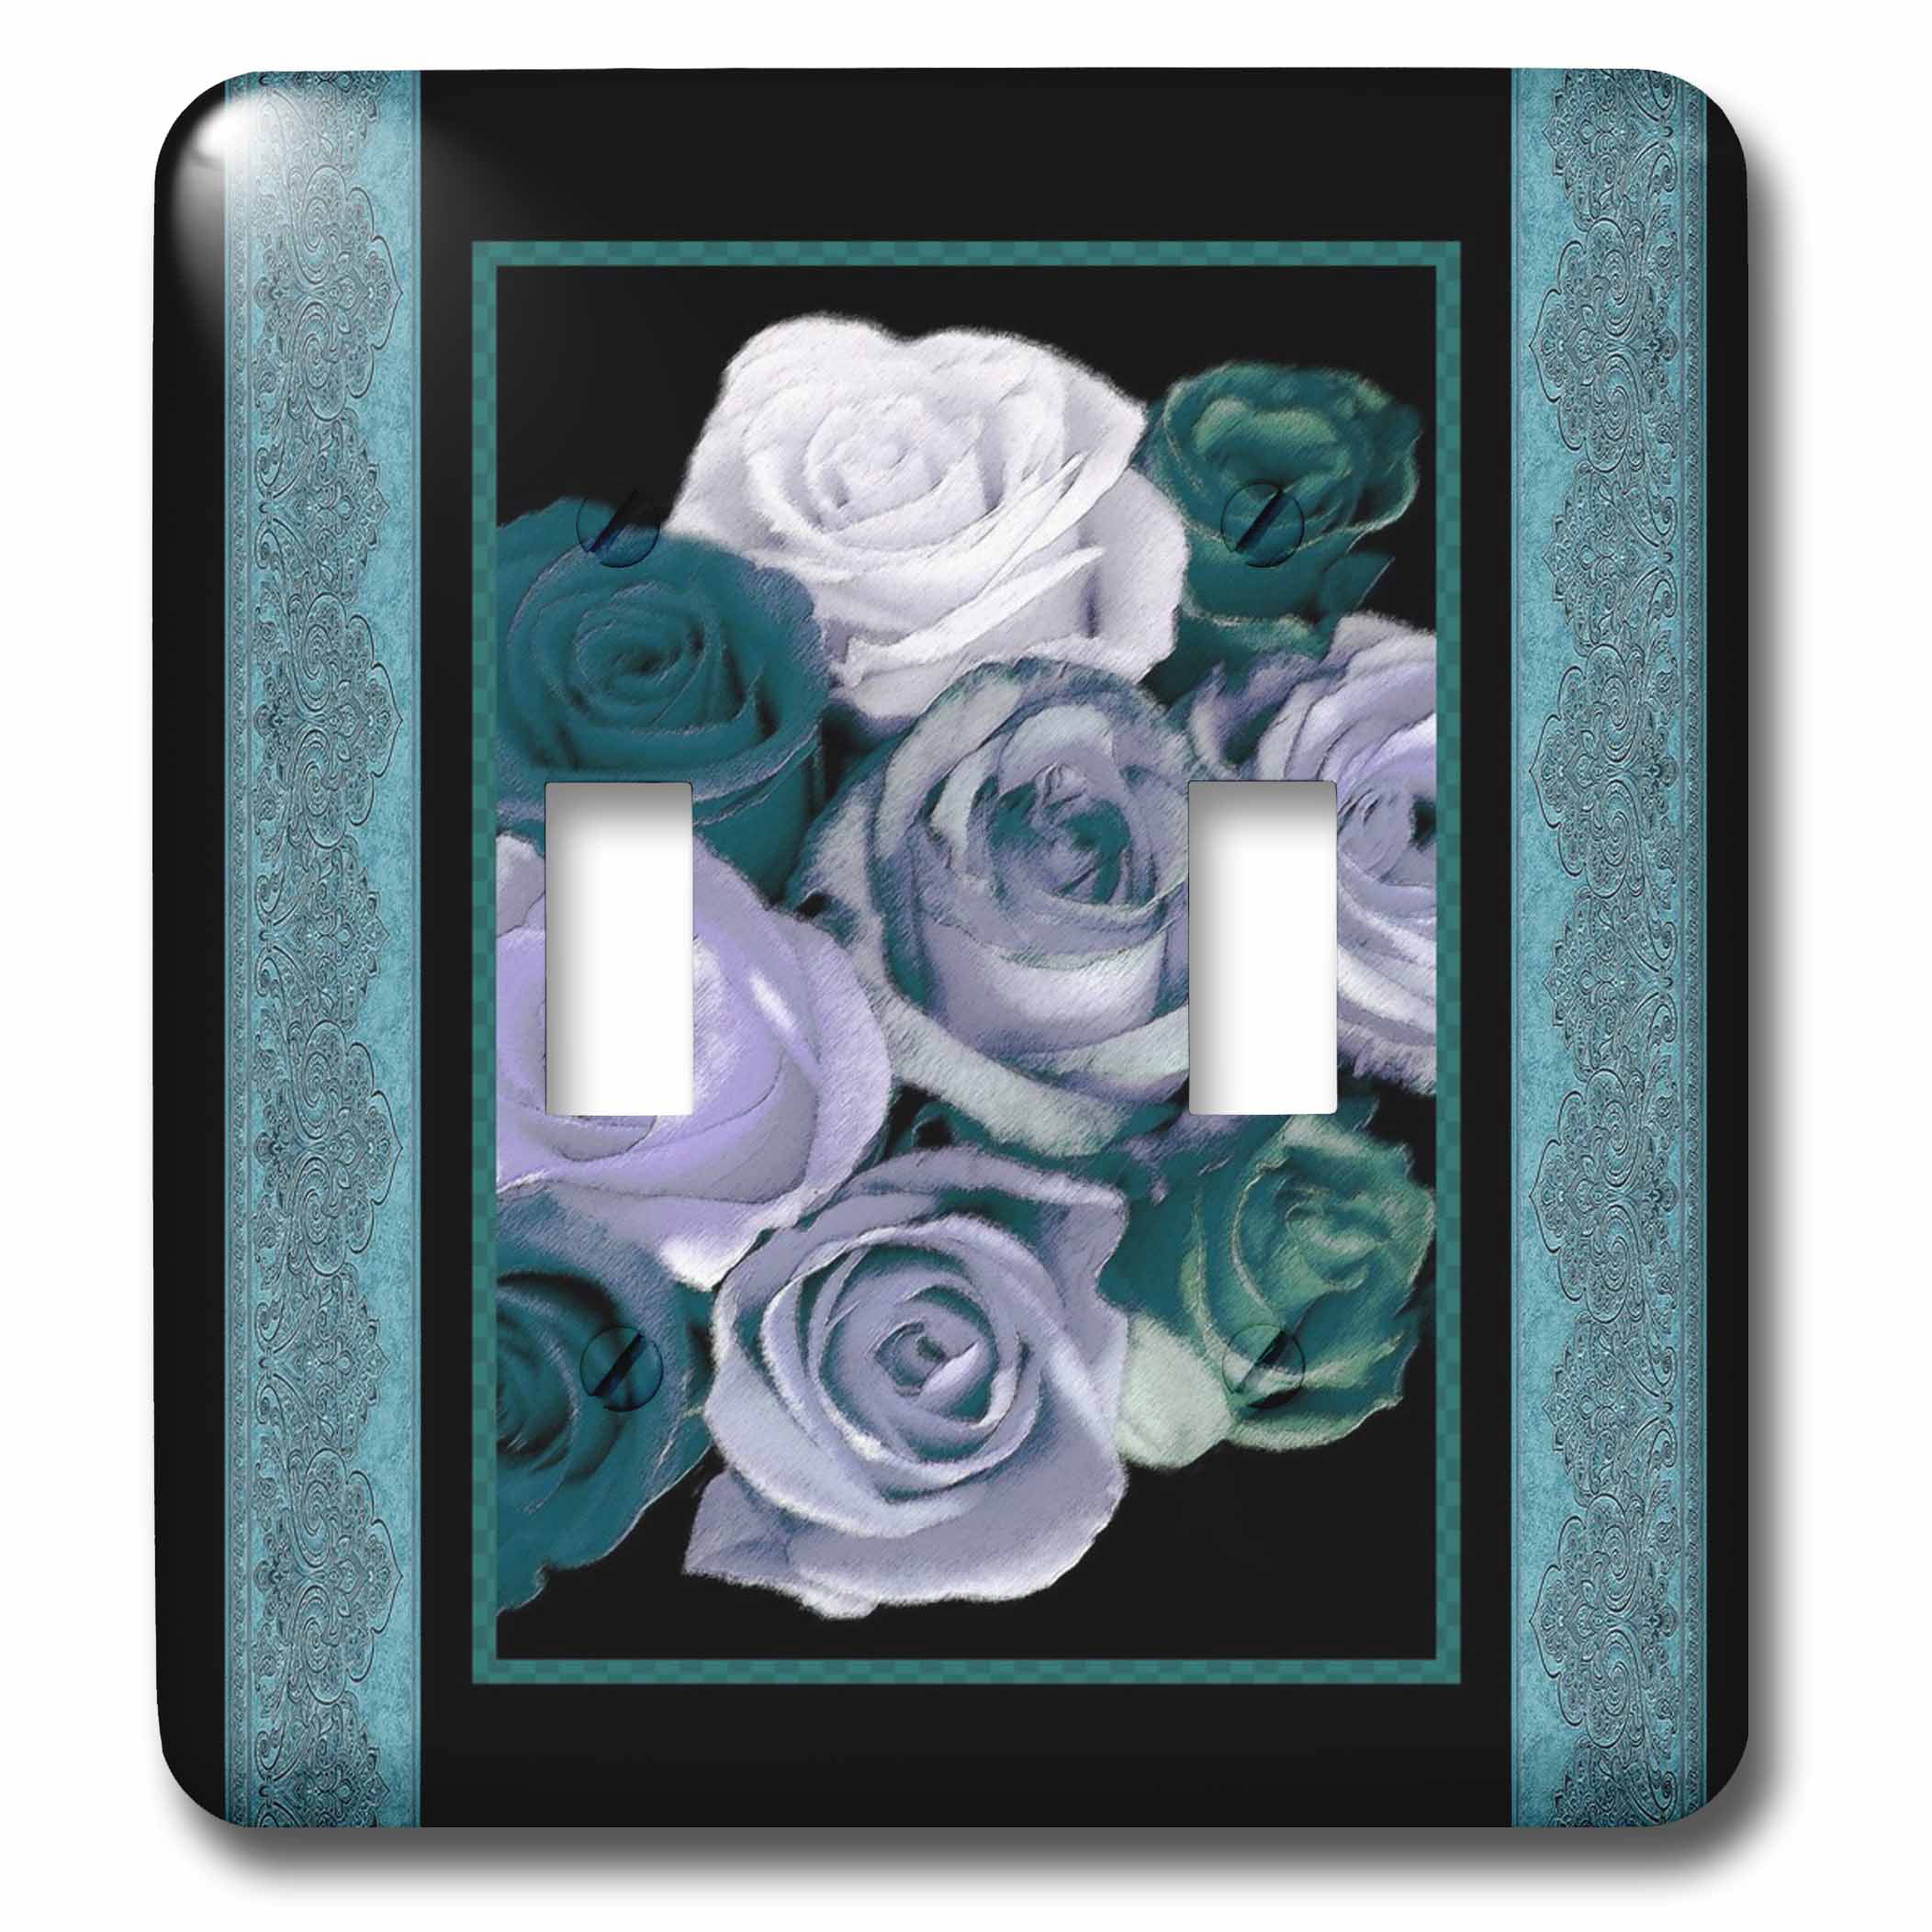 3dRose lsp_29800_2 Dreamy hues Roses with Ocean Damask Ribbon Trim Toggle Switch Teal Turquoise Blue